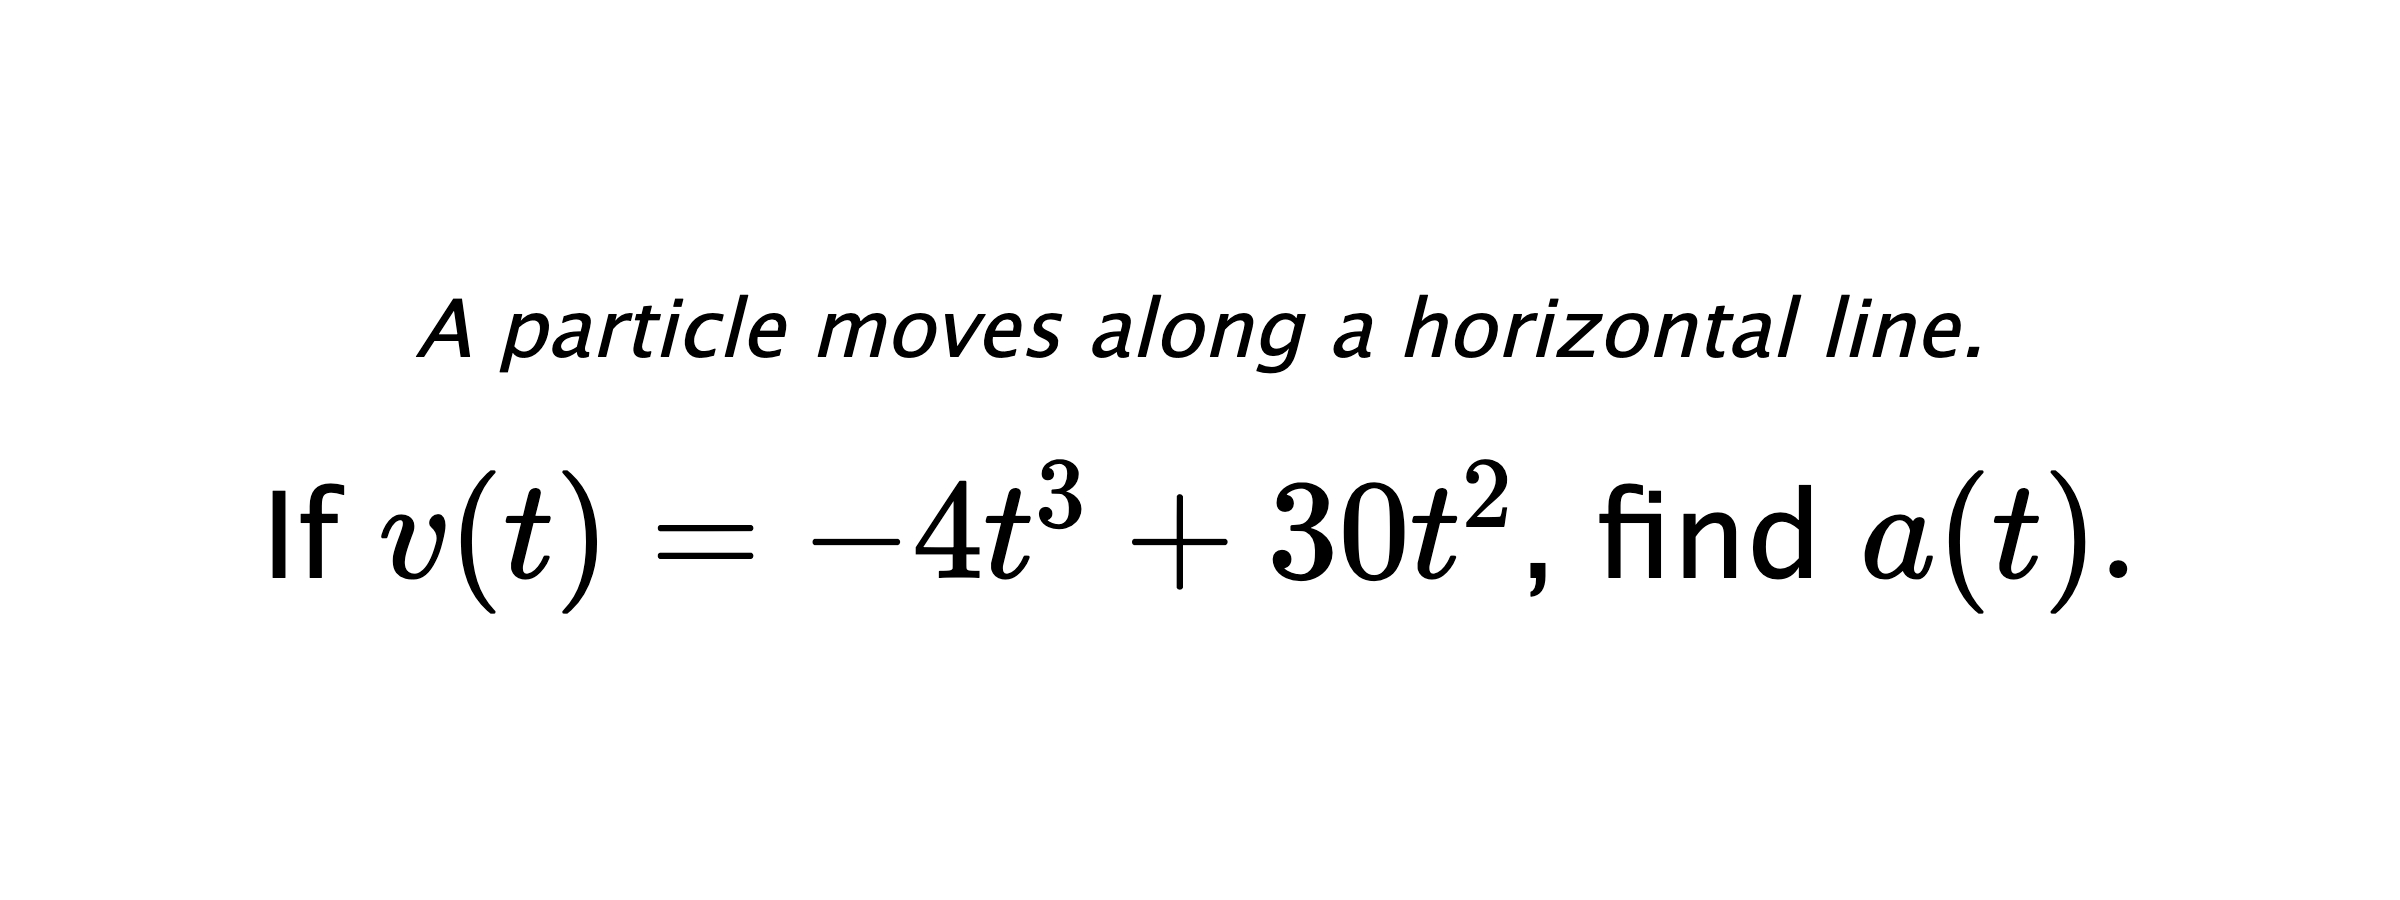 A particle moves along a horizontal line. If $ v(t)=-4t^3+30t^2 $, find $ a(t). $